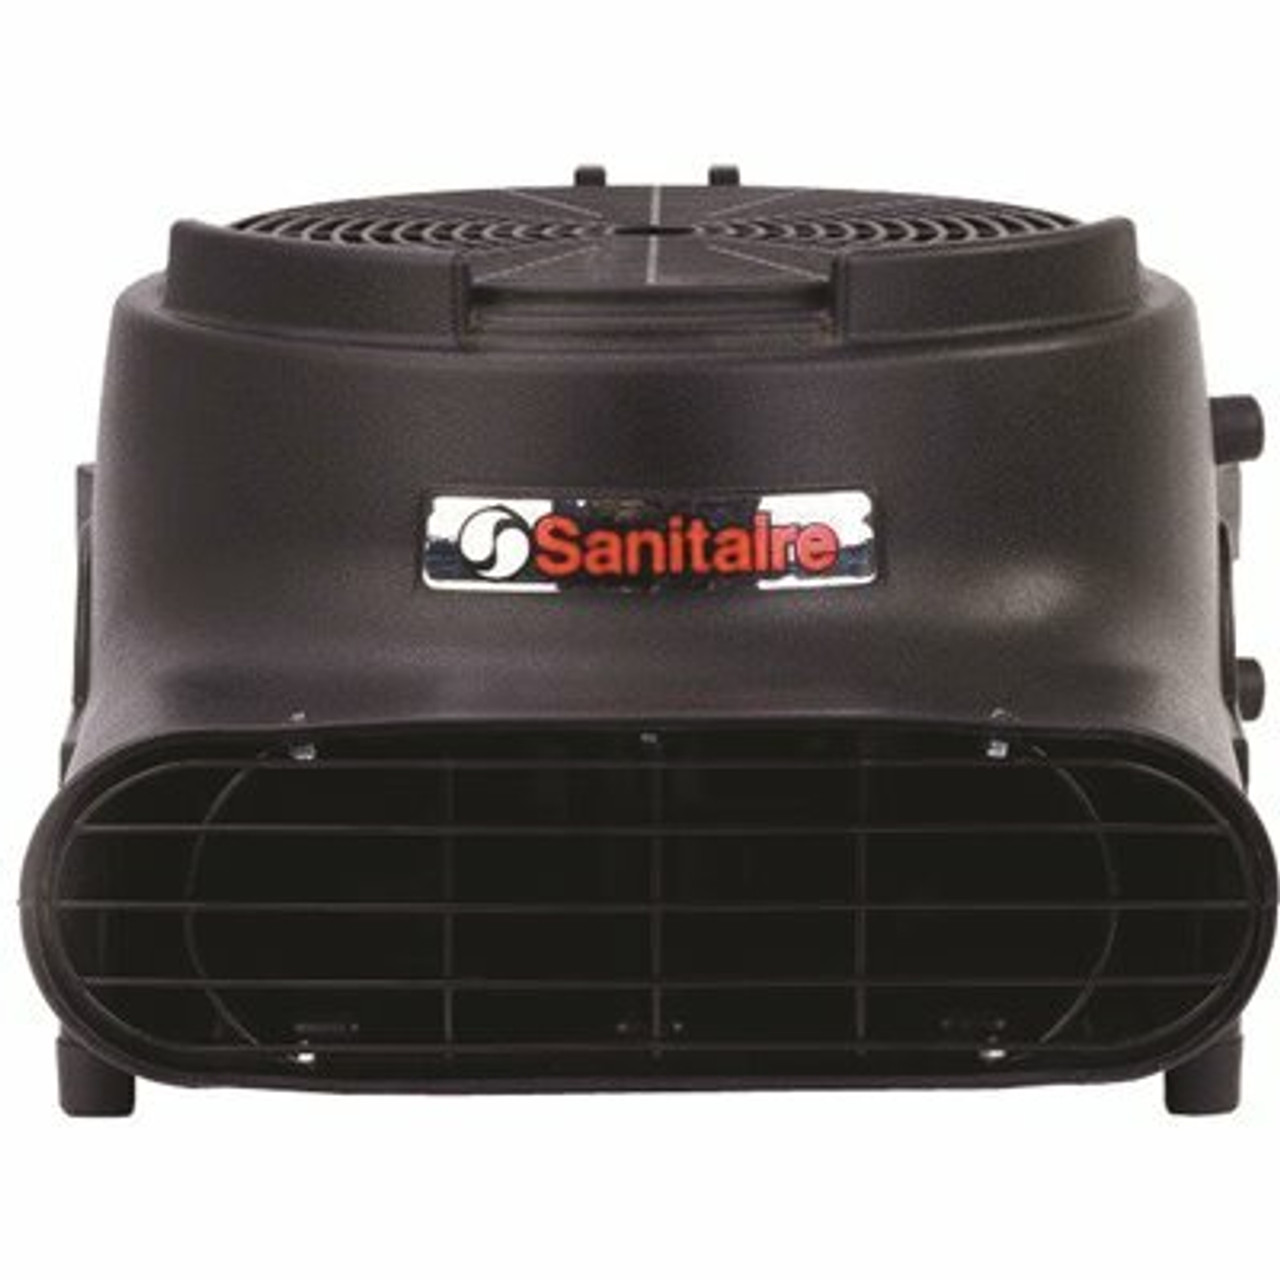 Sanitaire 3-Speed Dry Time Precision Air Mover Blower Fan